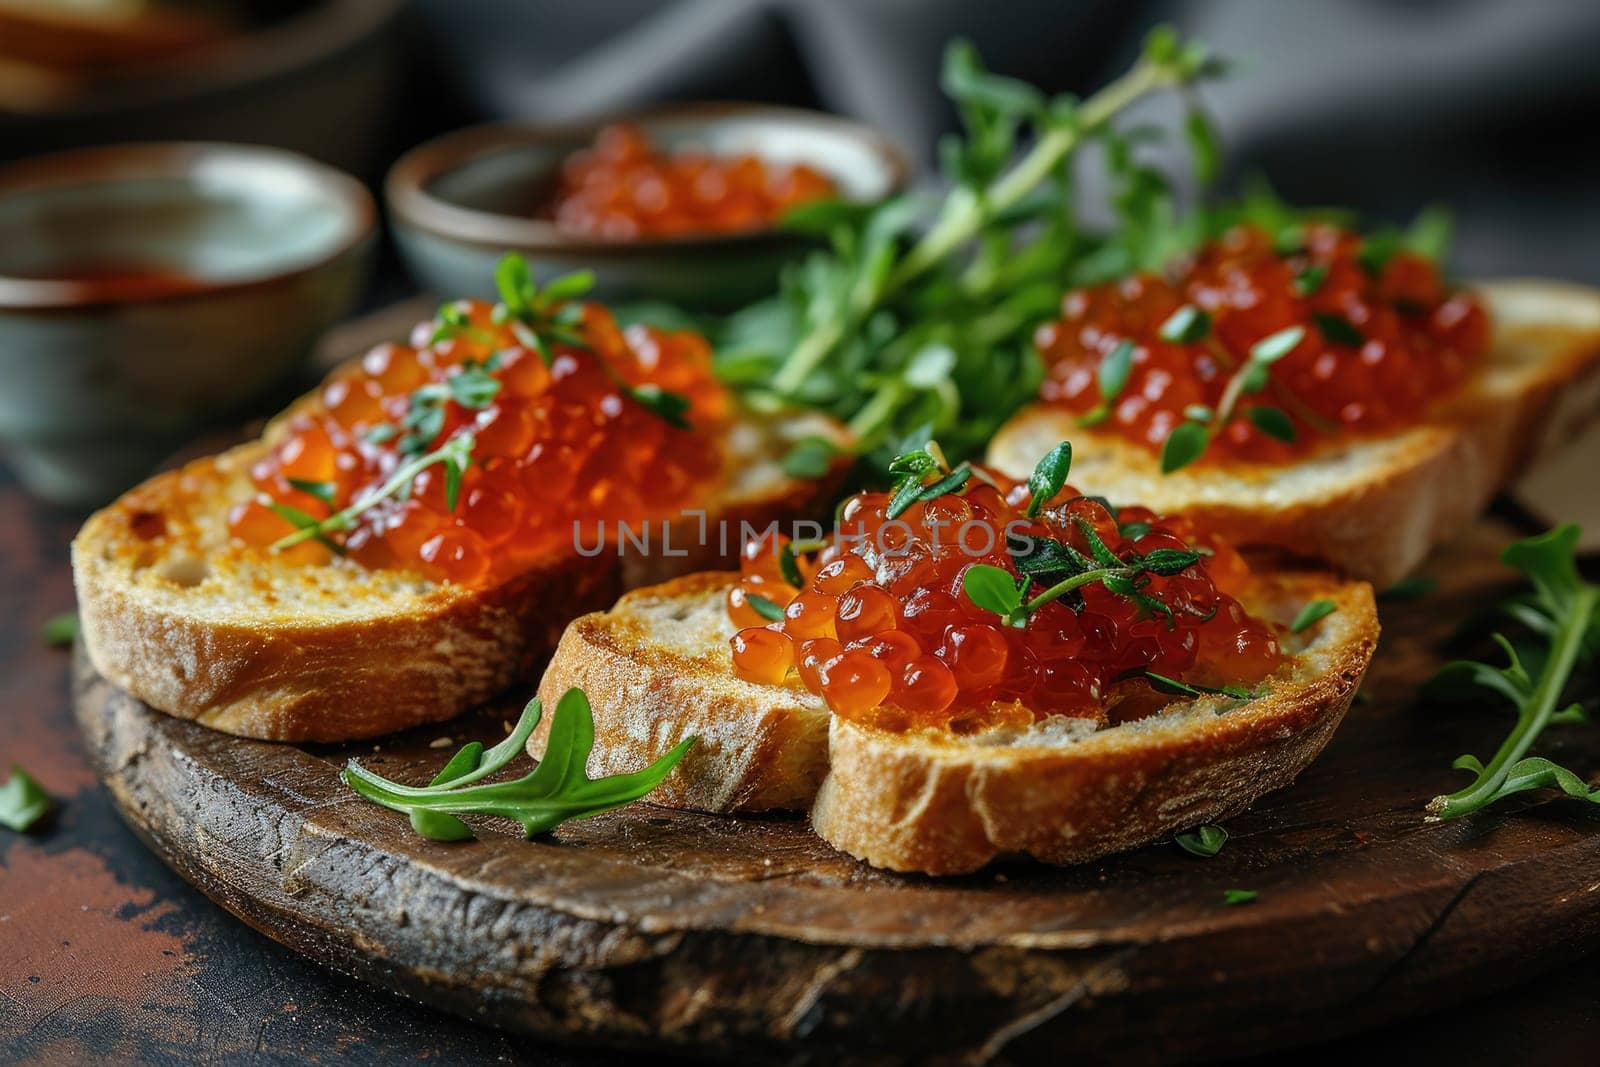 A seductive image: a gourmet sandwich with red caviar laid out on a wooden table